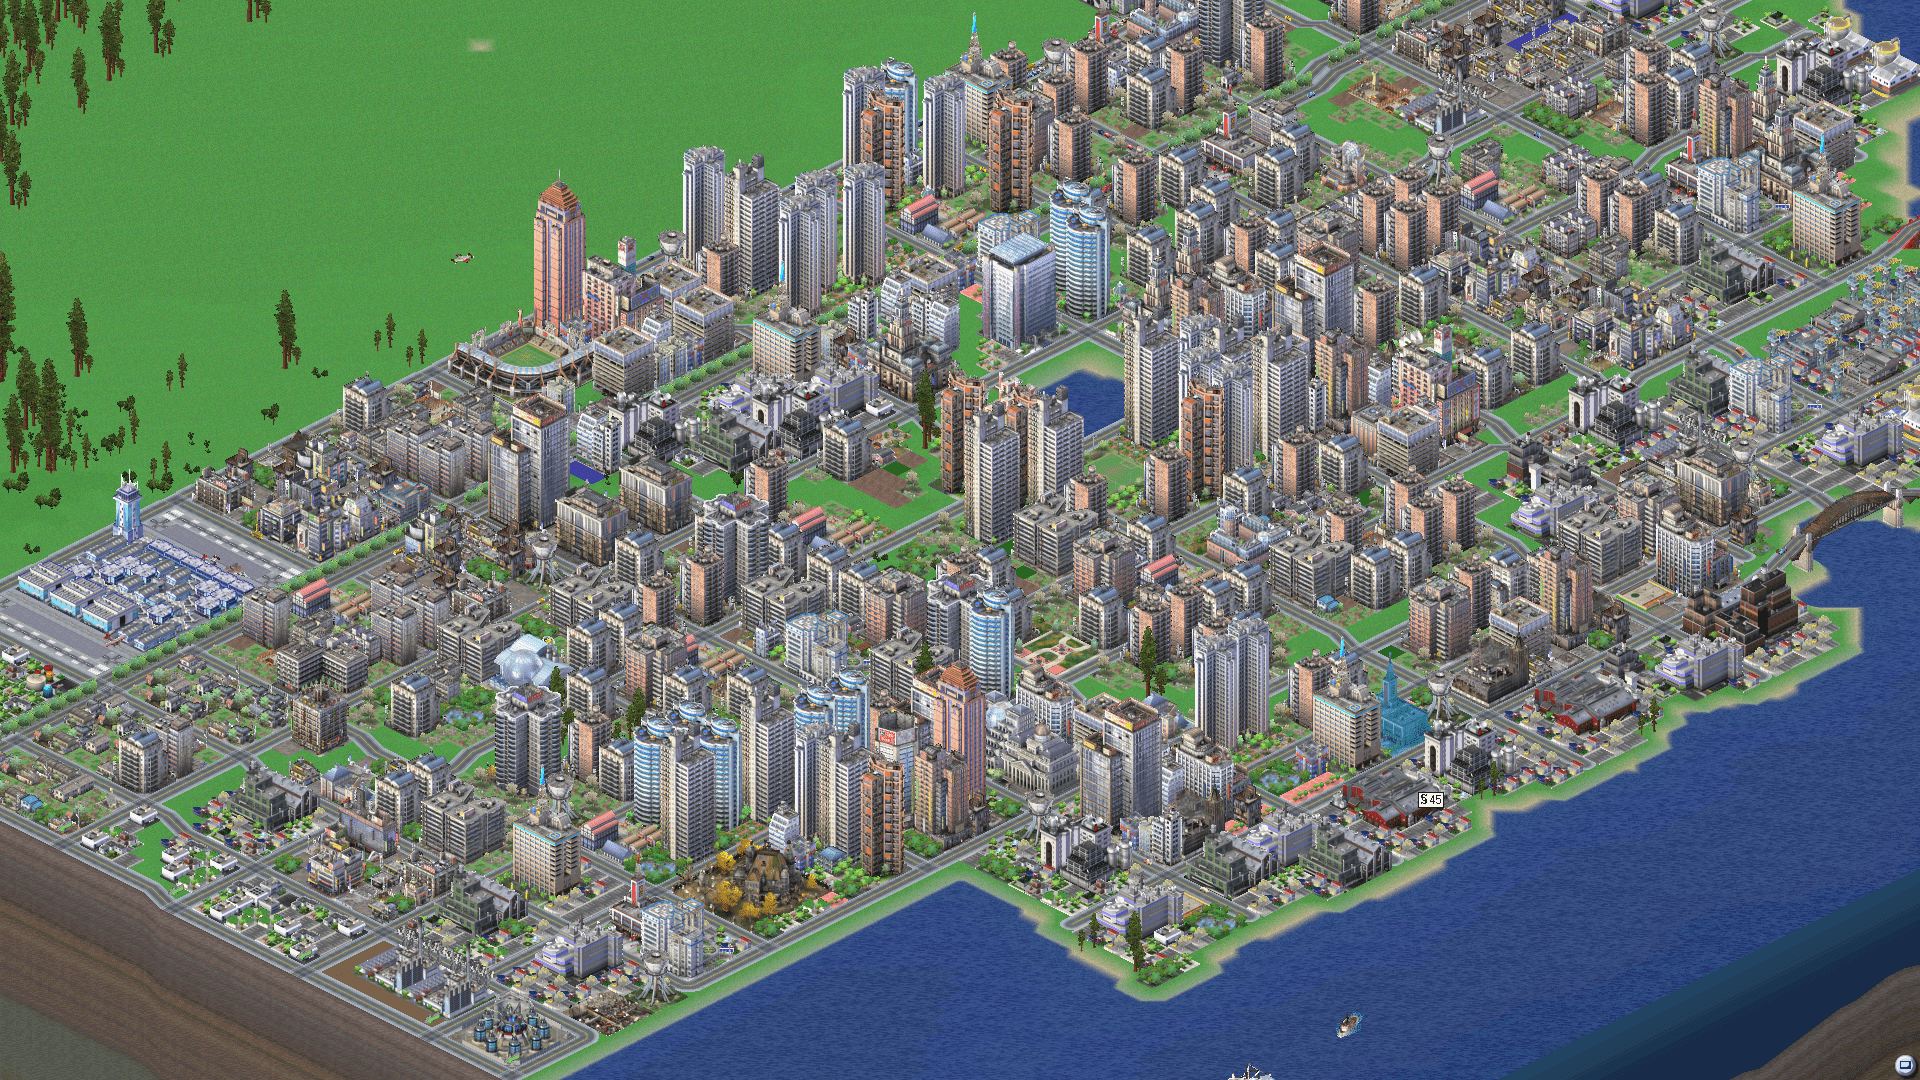 Isometric Aerial View from SimCity 3000 showing a large portion of a city next to a coastline.